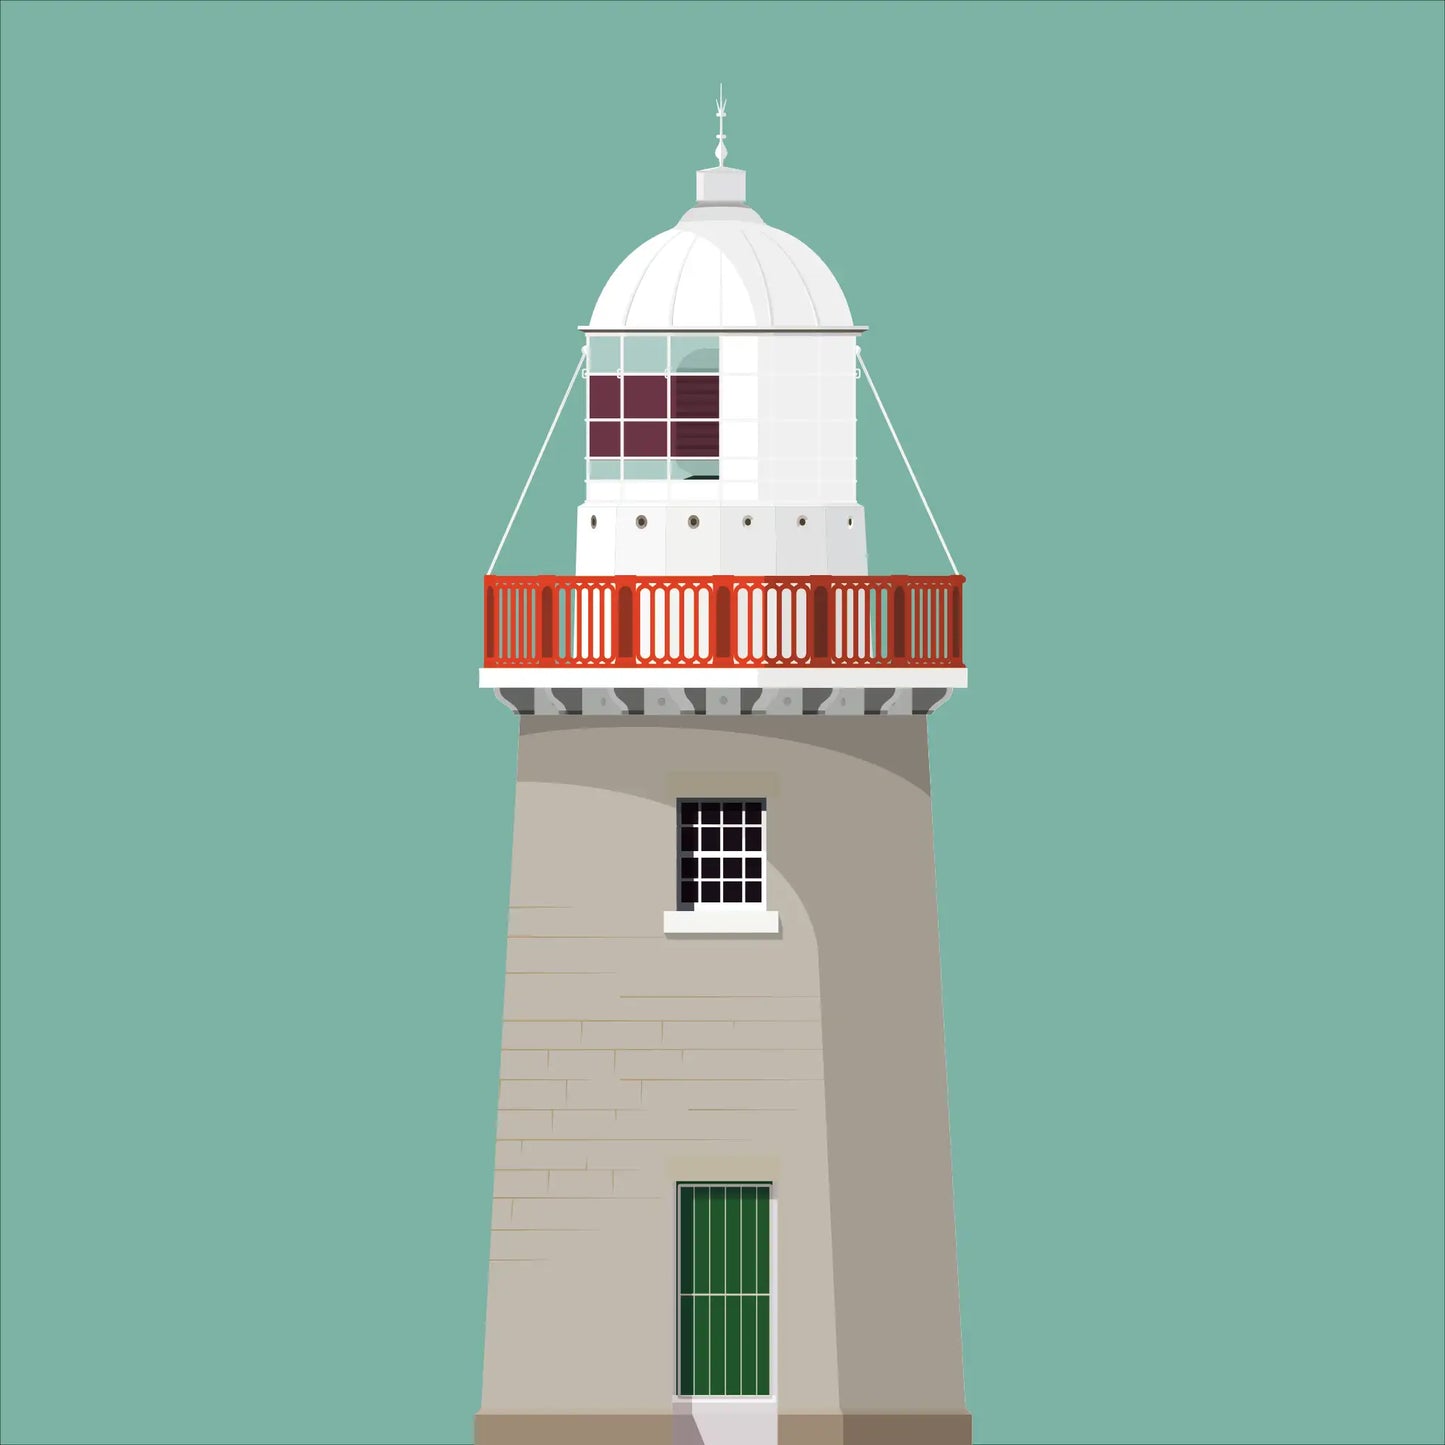 Contemporary graphic illustration of Little Samphire Island lighthouse on a white background inside light blue square.